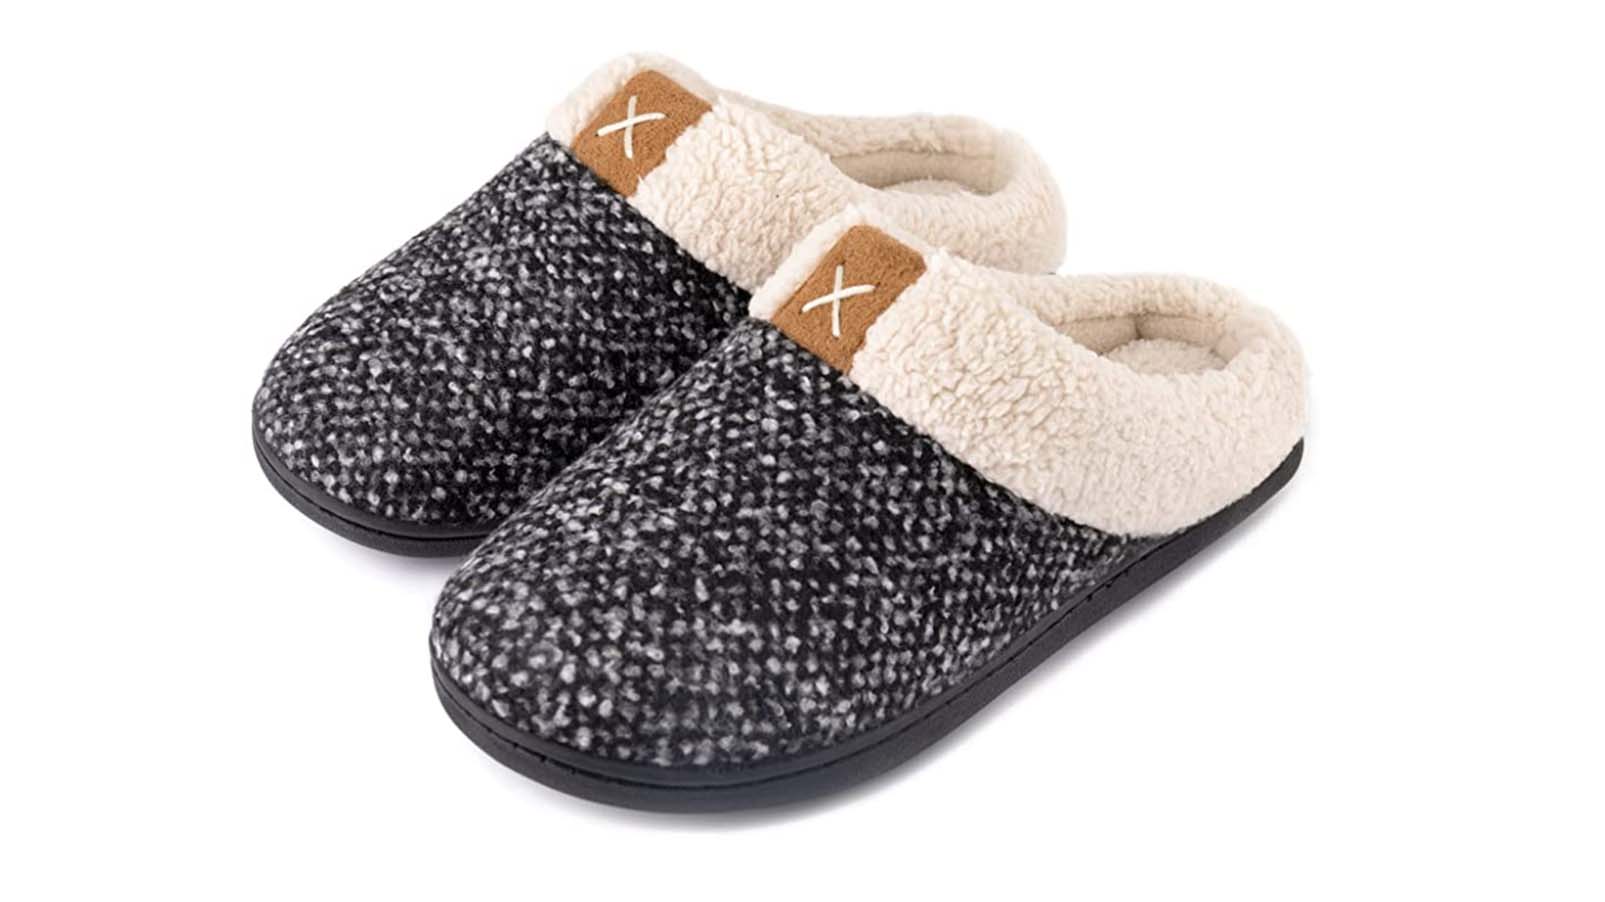 Best slippers for women and men: Cozy and warm